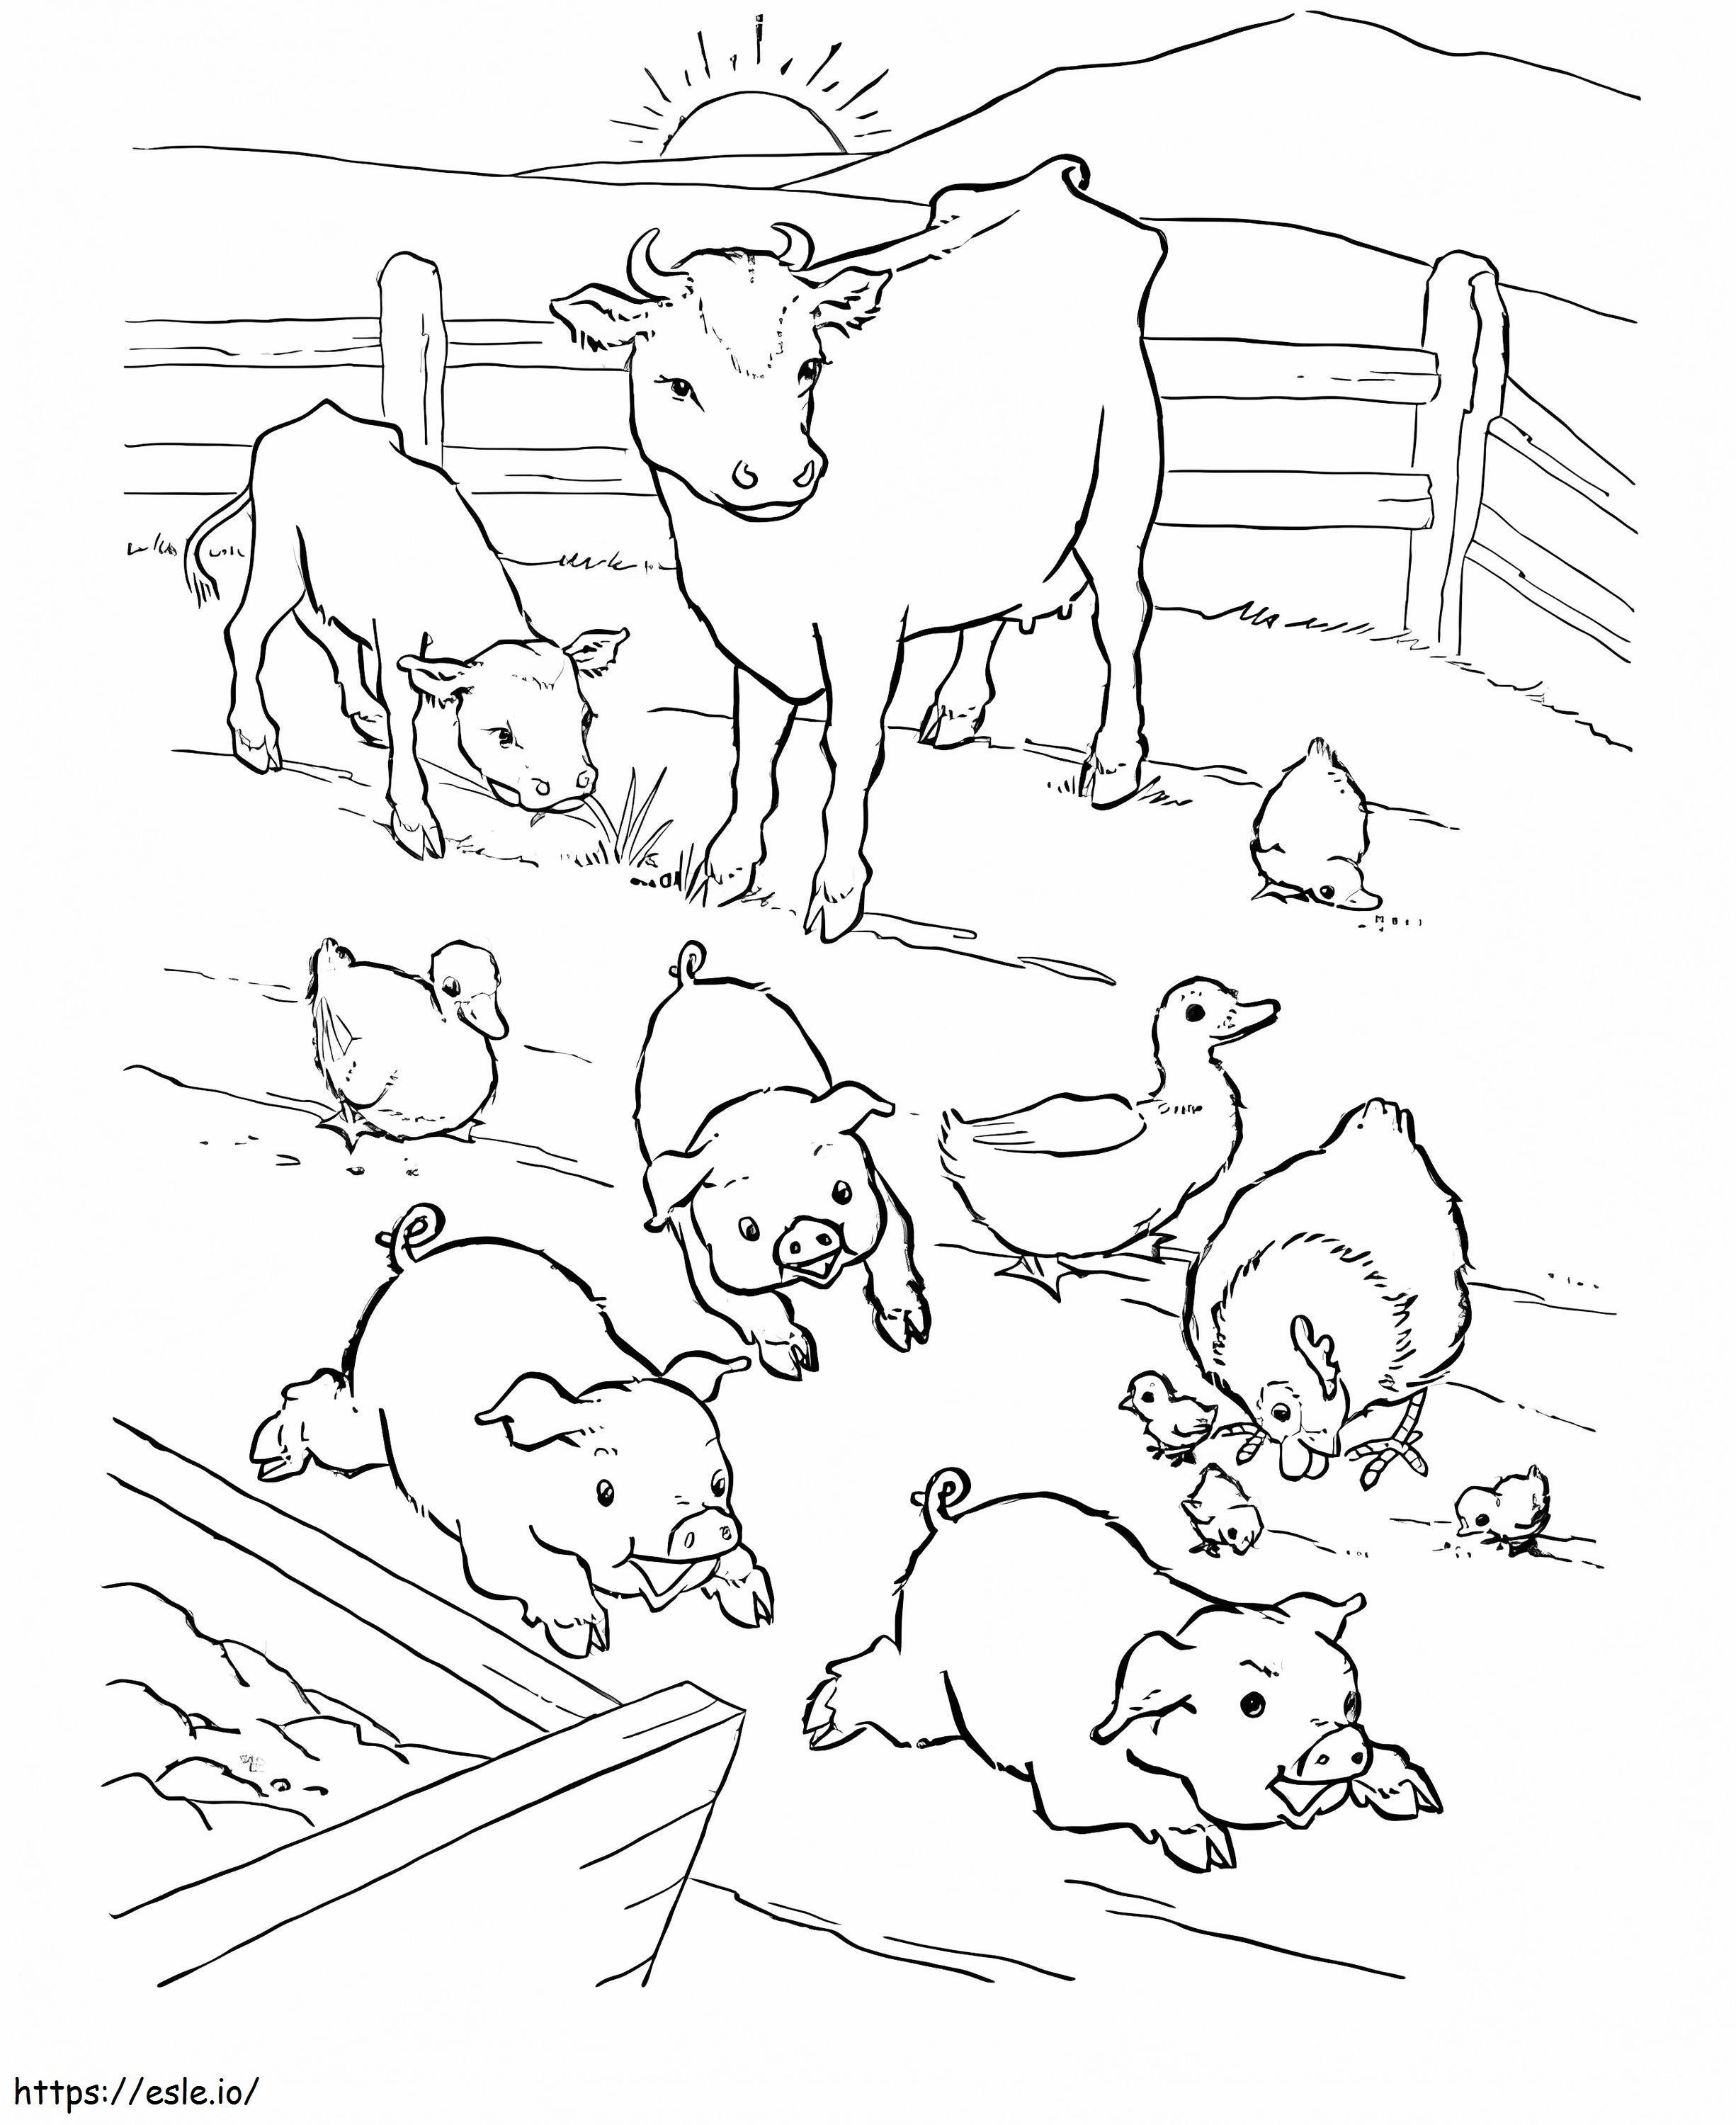 Three Animals Corral coloring page